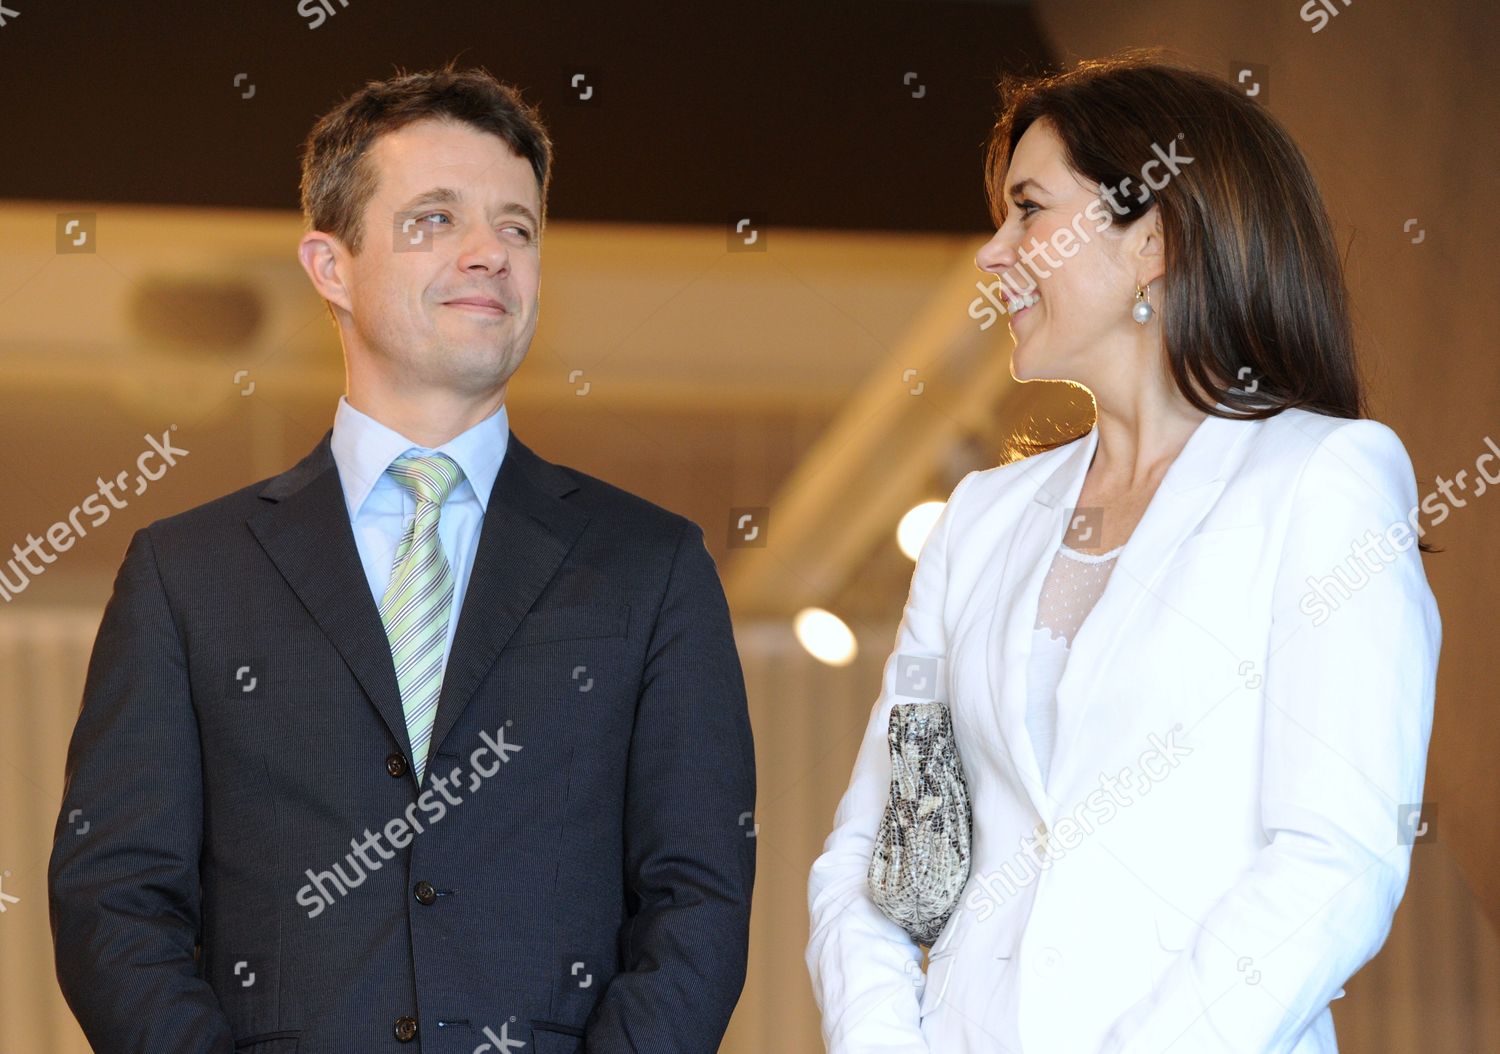 prince-frederik-and-princess-mary-official-visit-to-melbourne-australia-shutterstock-editorial-1500197ab.jpg